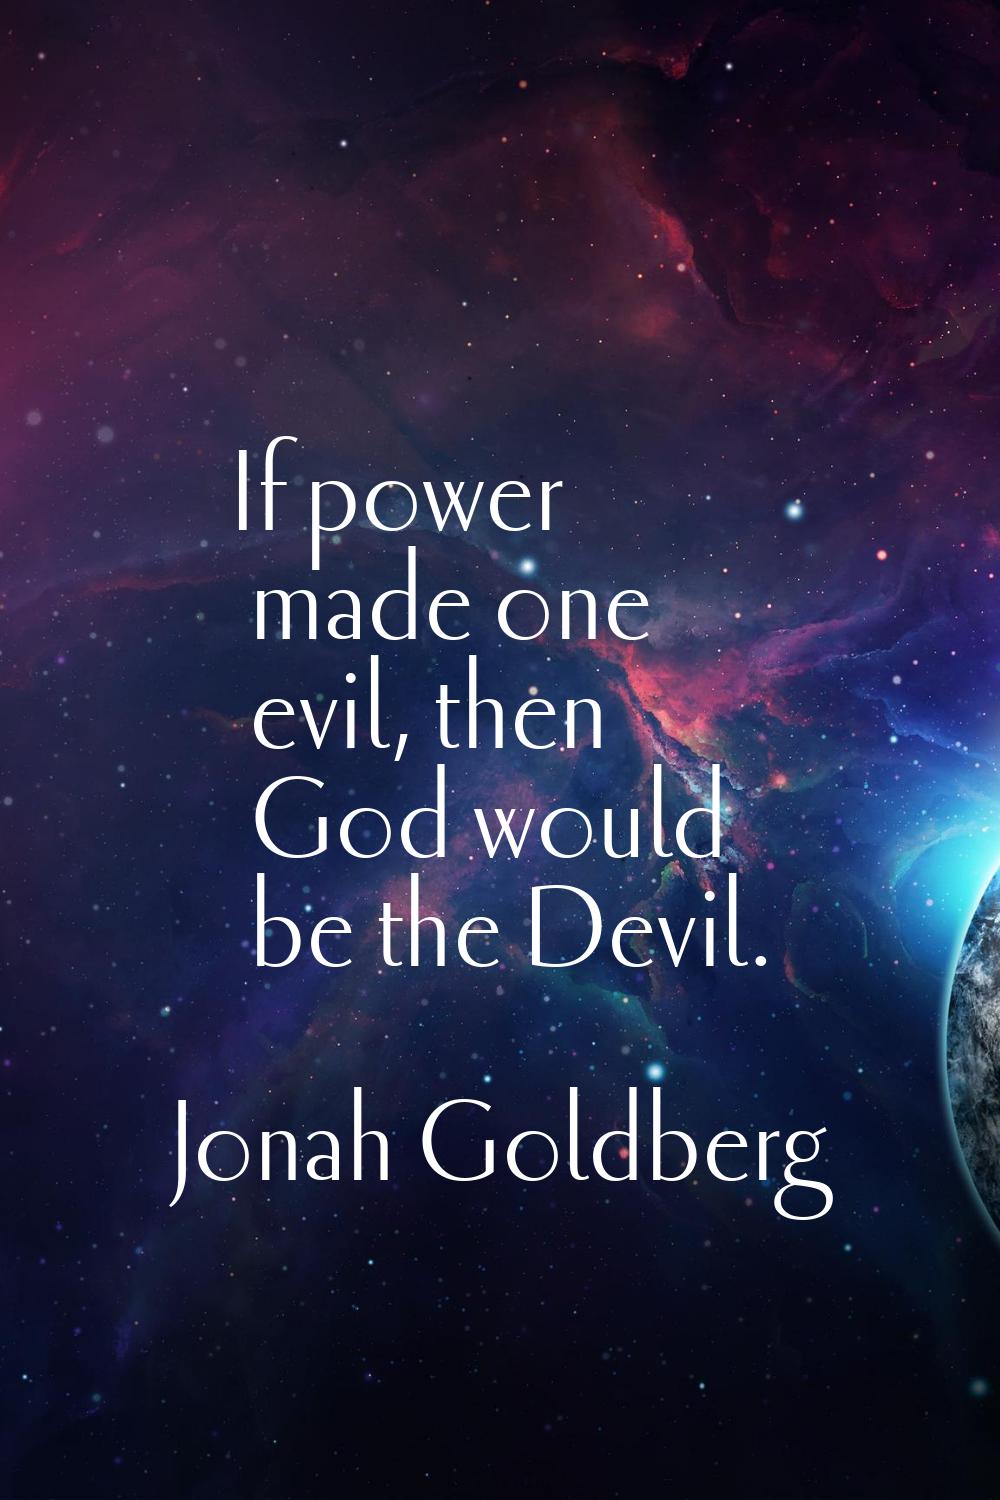 If power made one evil, then God would be the Devil.